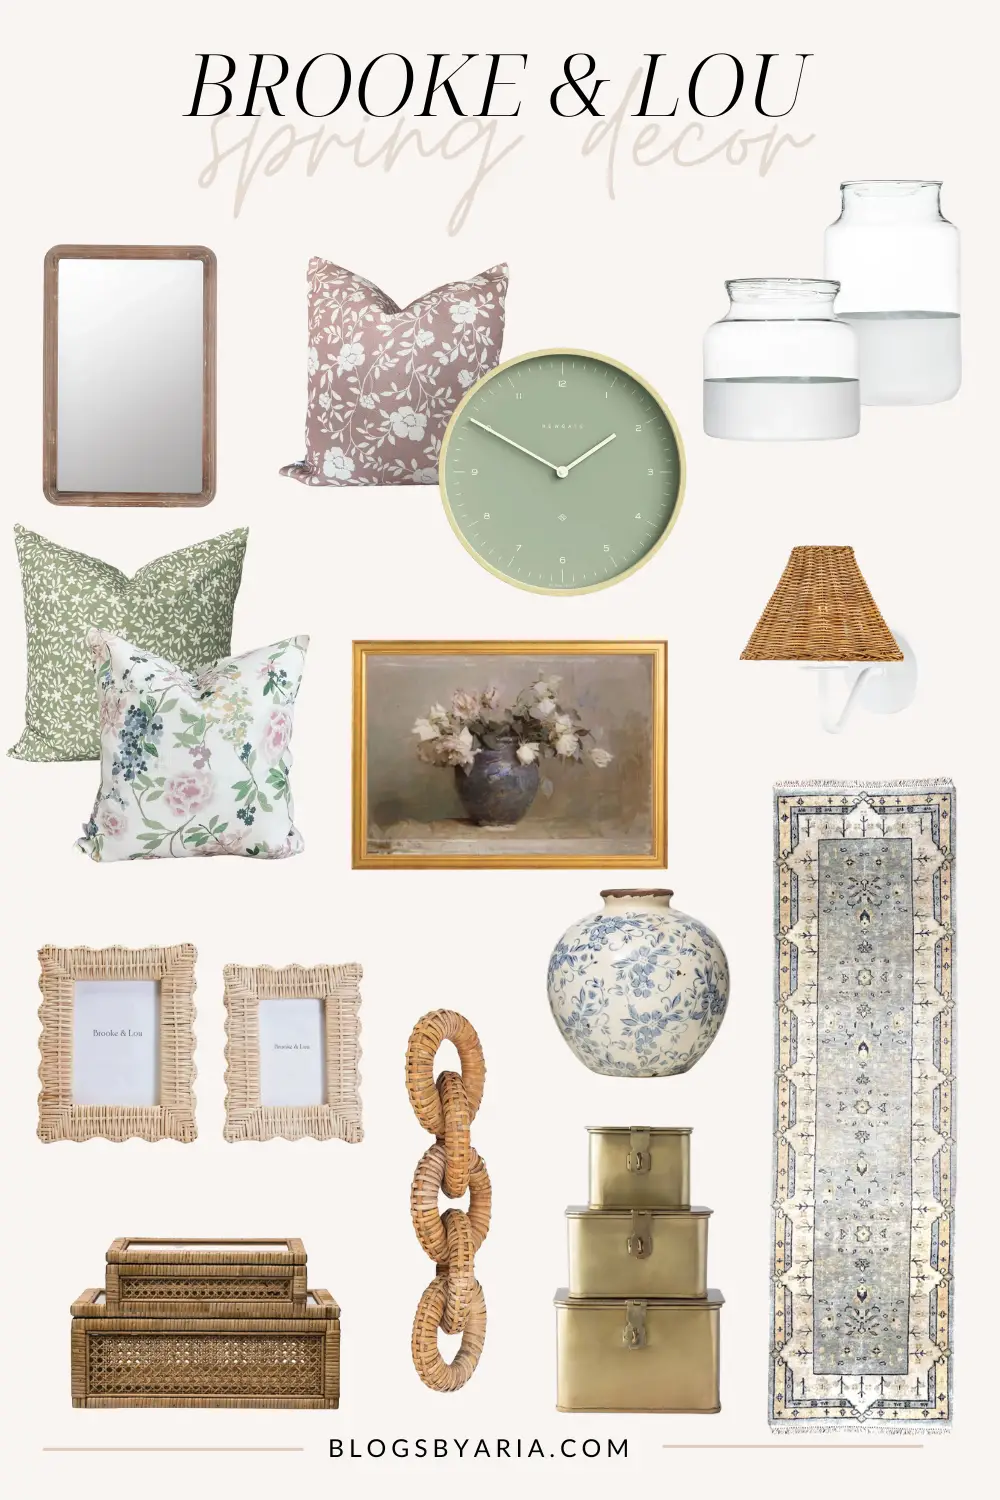 Brooke & Lou Spring Decor Finds - Blogs by Aria